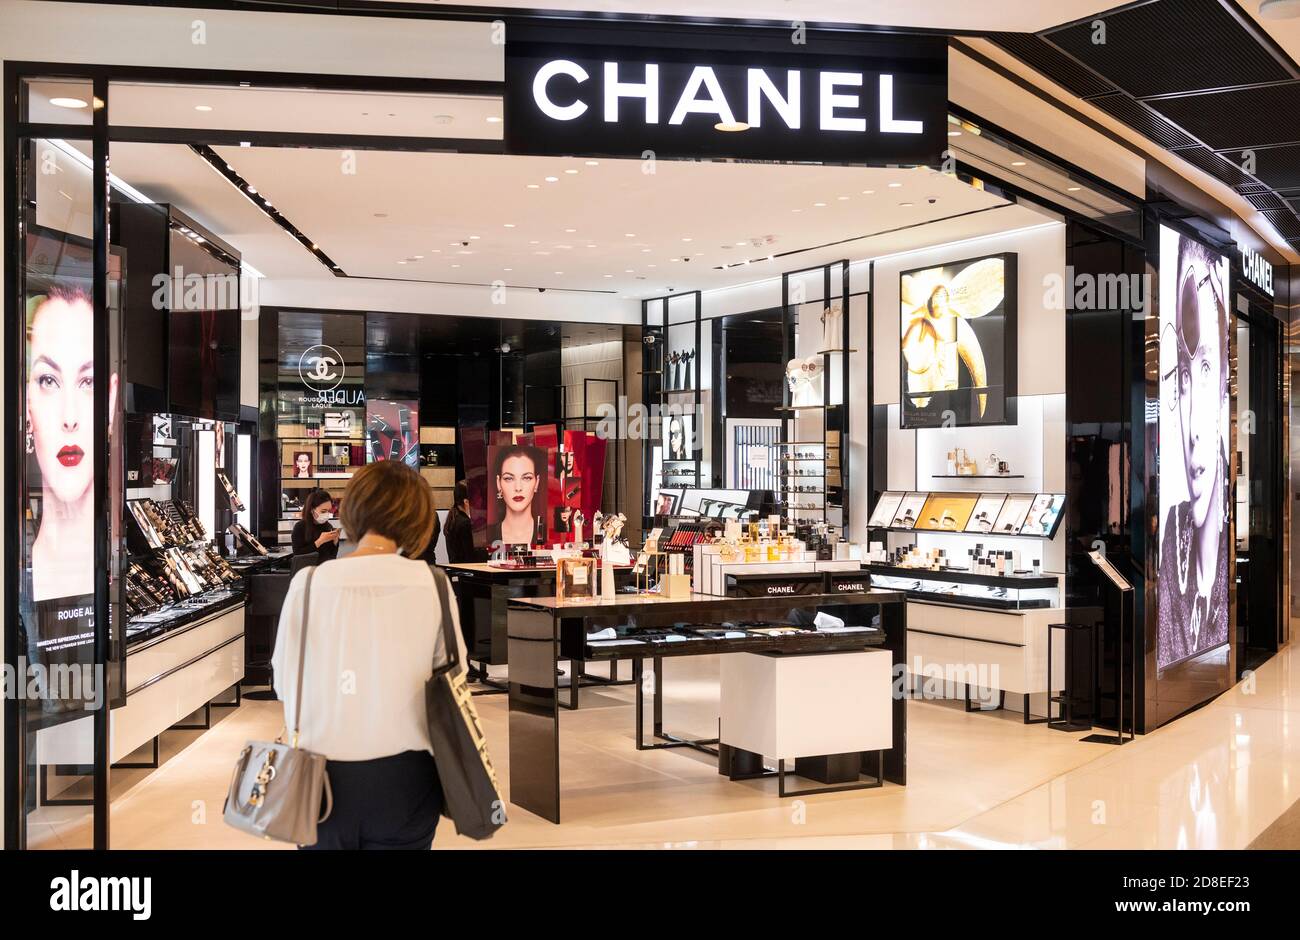 French multinational Chanel clothing and beauty products brand store seen  in Hong Kong Stock Photo - Alamy